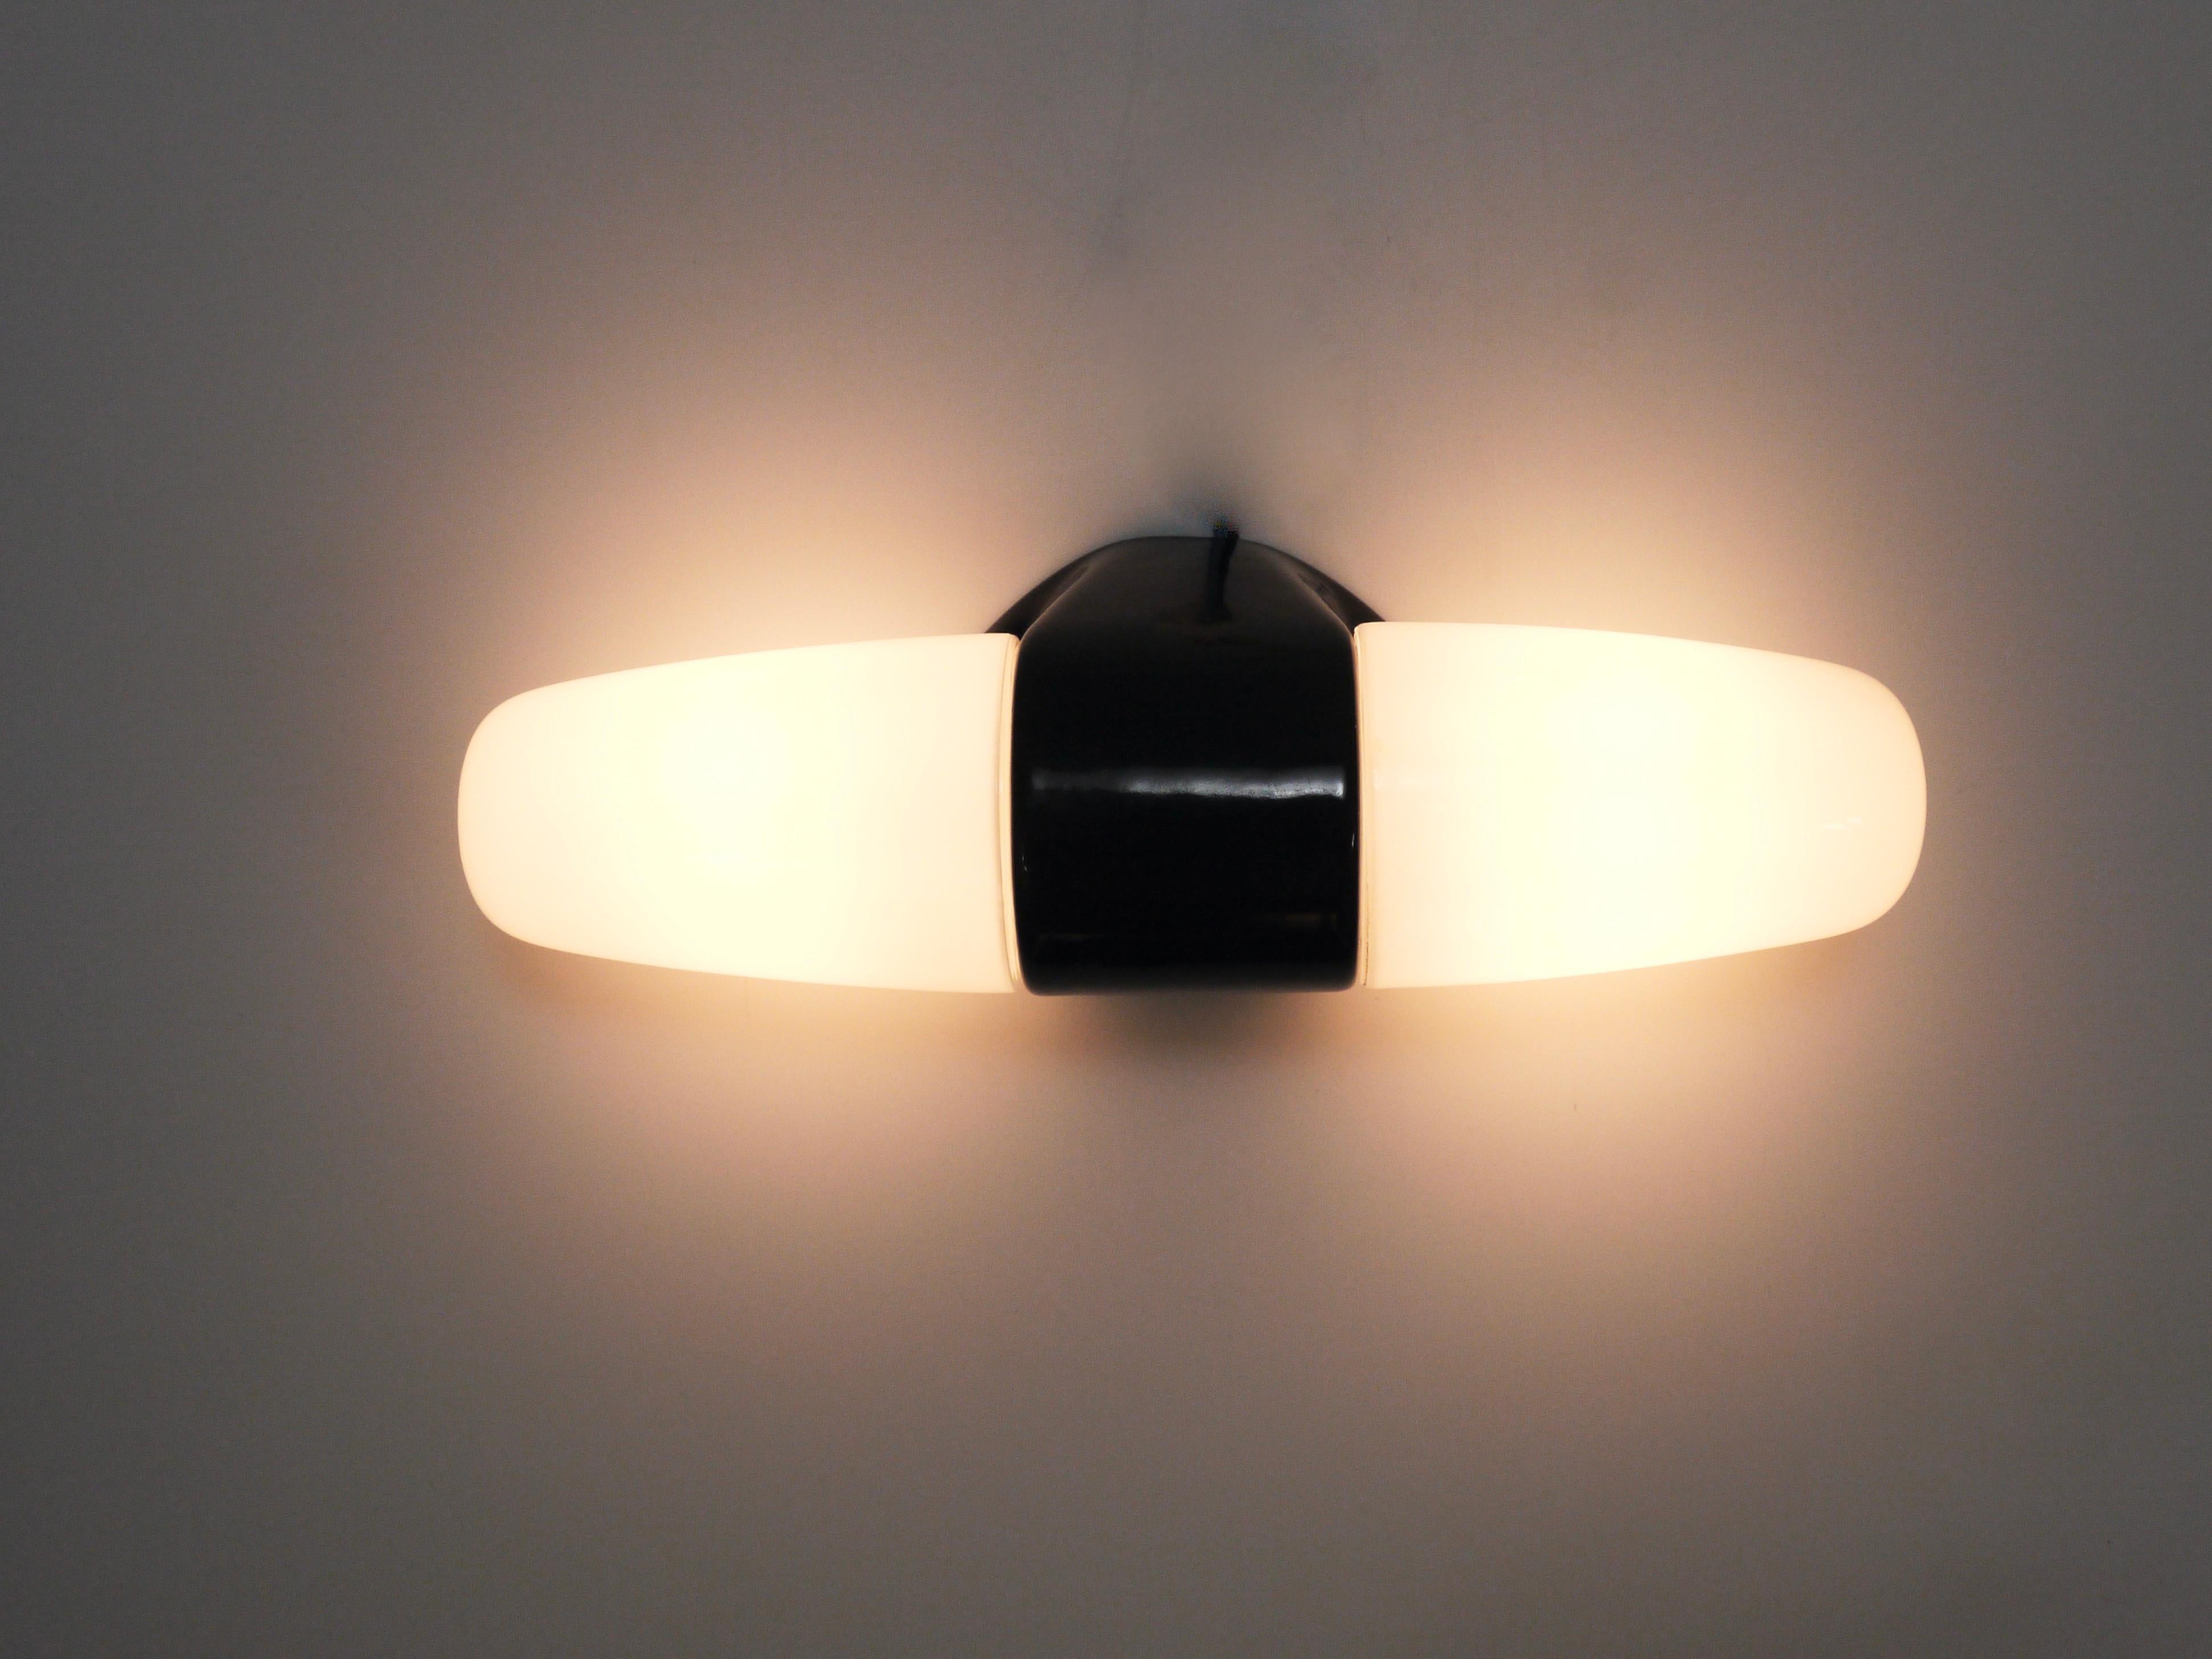 A Midcentury Modern double socket wall lamp/sconce dating back to the 1950s, designed by Wilhelm Wagenfeld. Made of porcelain with a glossy black glaze accentuated by two white opaline glass lampshades/bulb covers. Based on our experience so far,